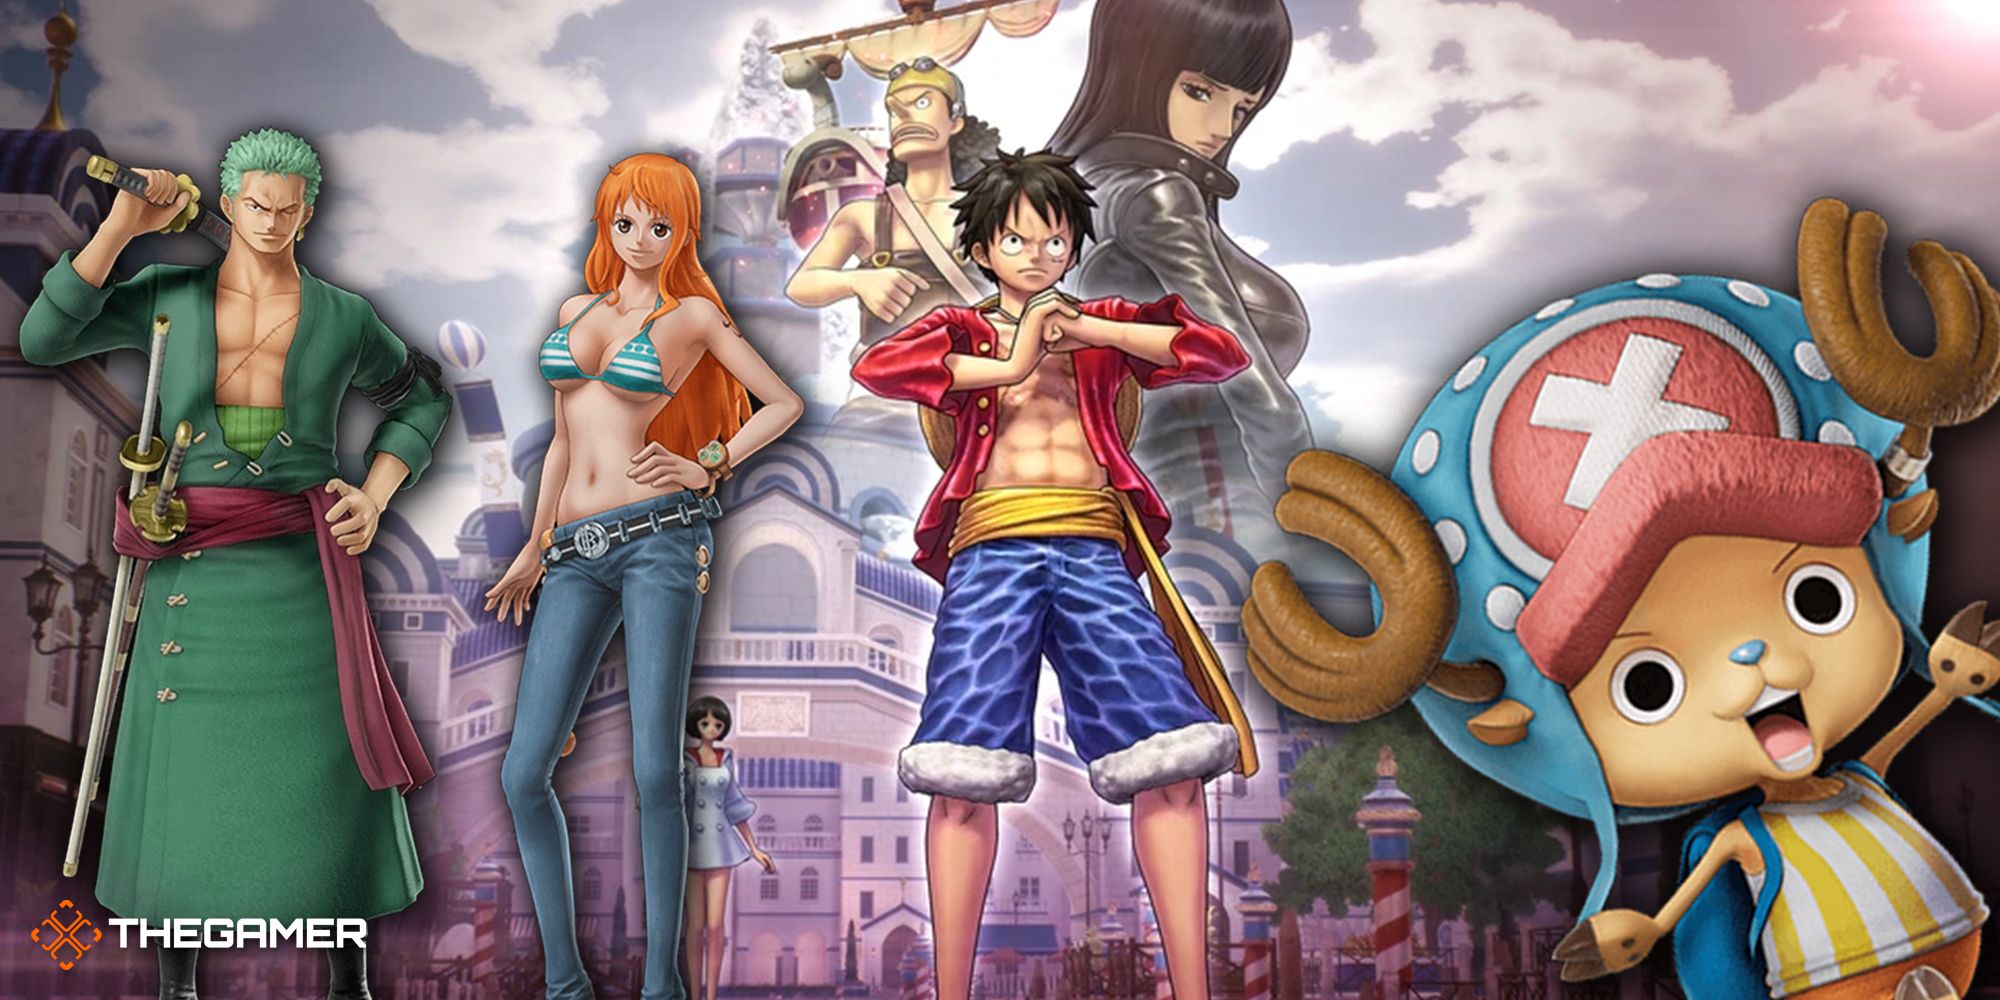 Game art from One Piece Odyssey.